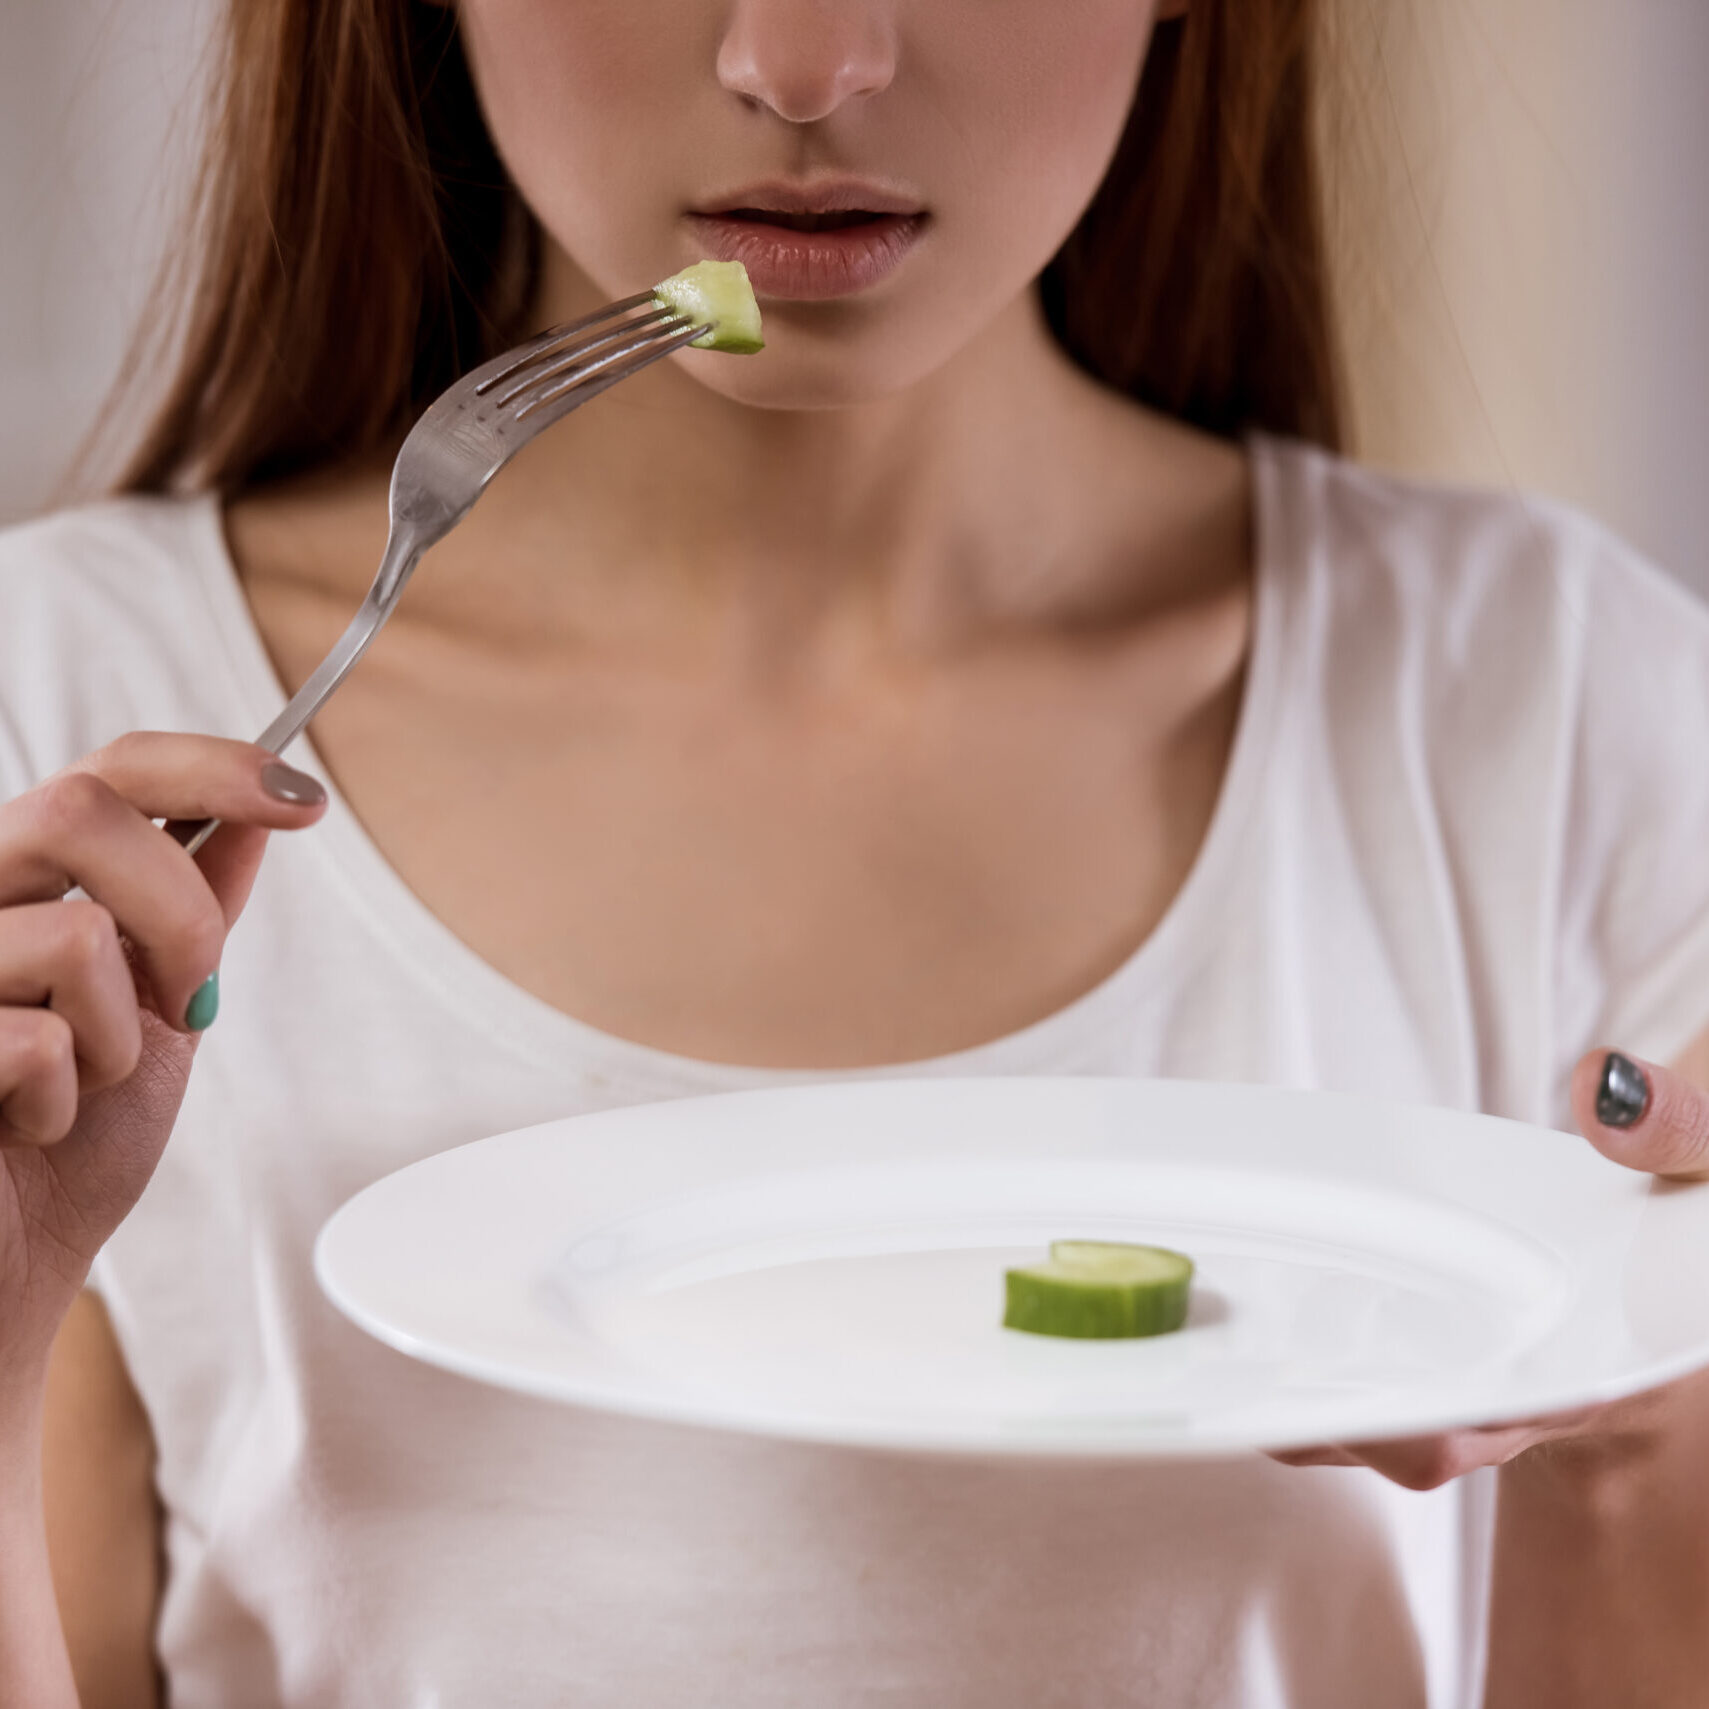 Thin girl with an empty plate standing in the center of the room closeup, malnutrition harms health.